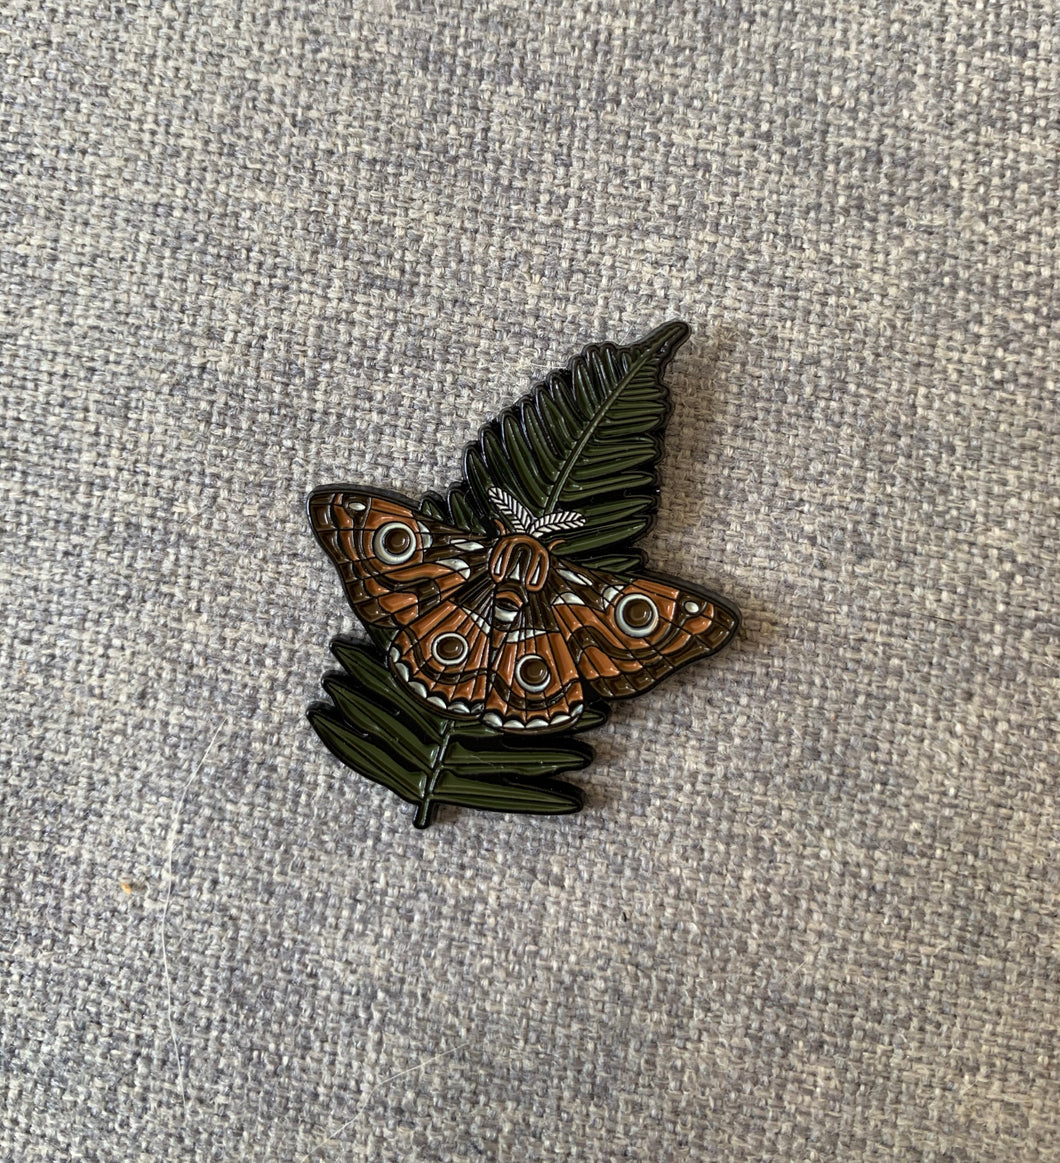 Moth and fern pin